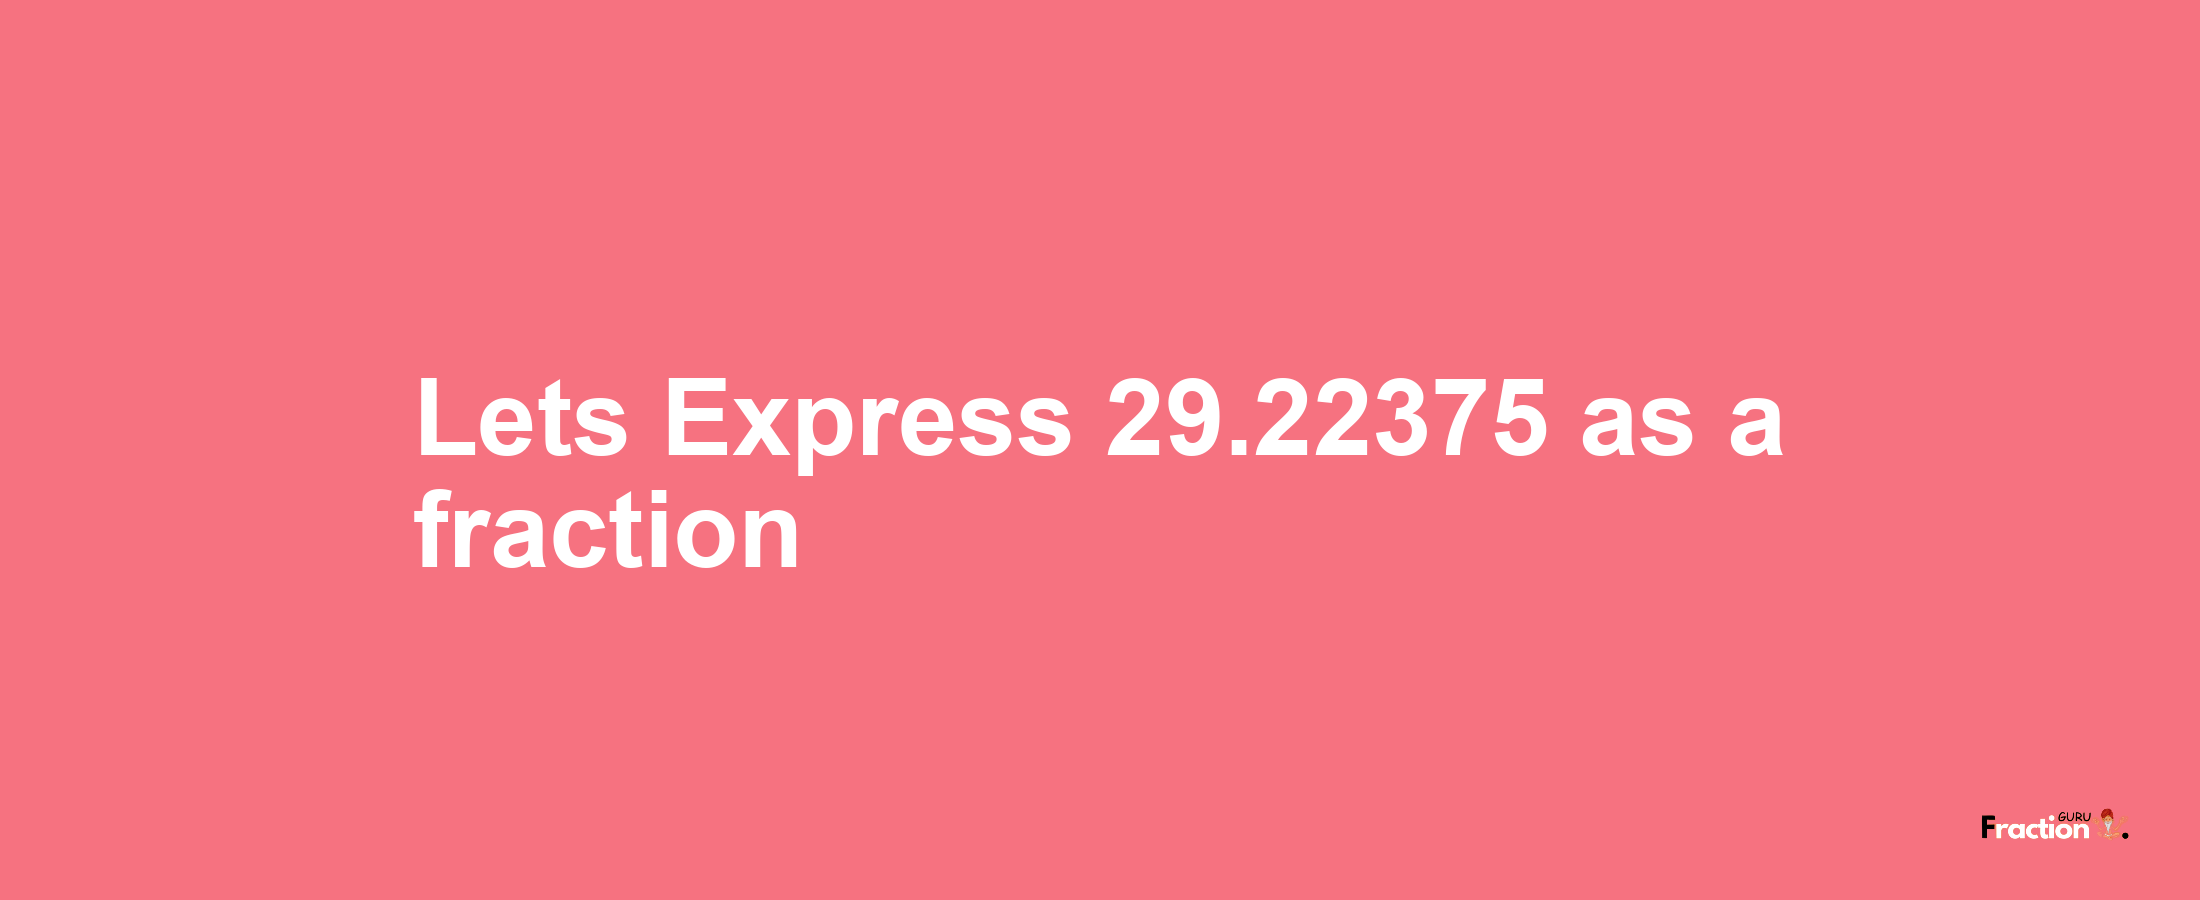 Lets Express 29.22375 as afraction